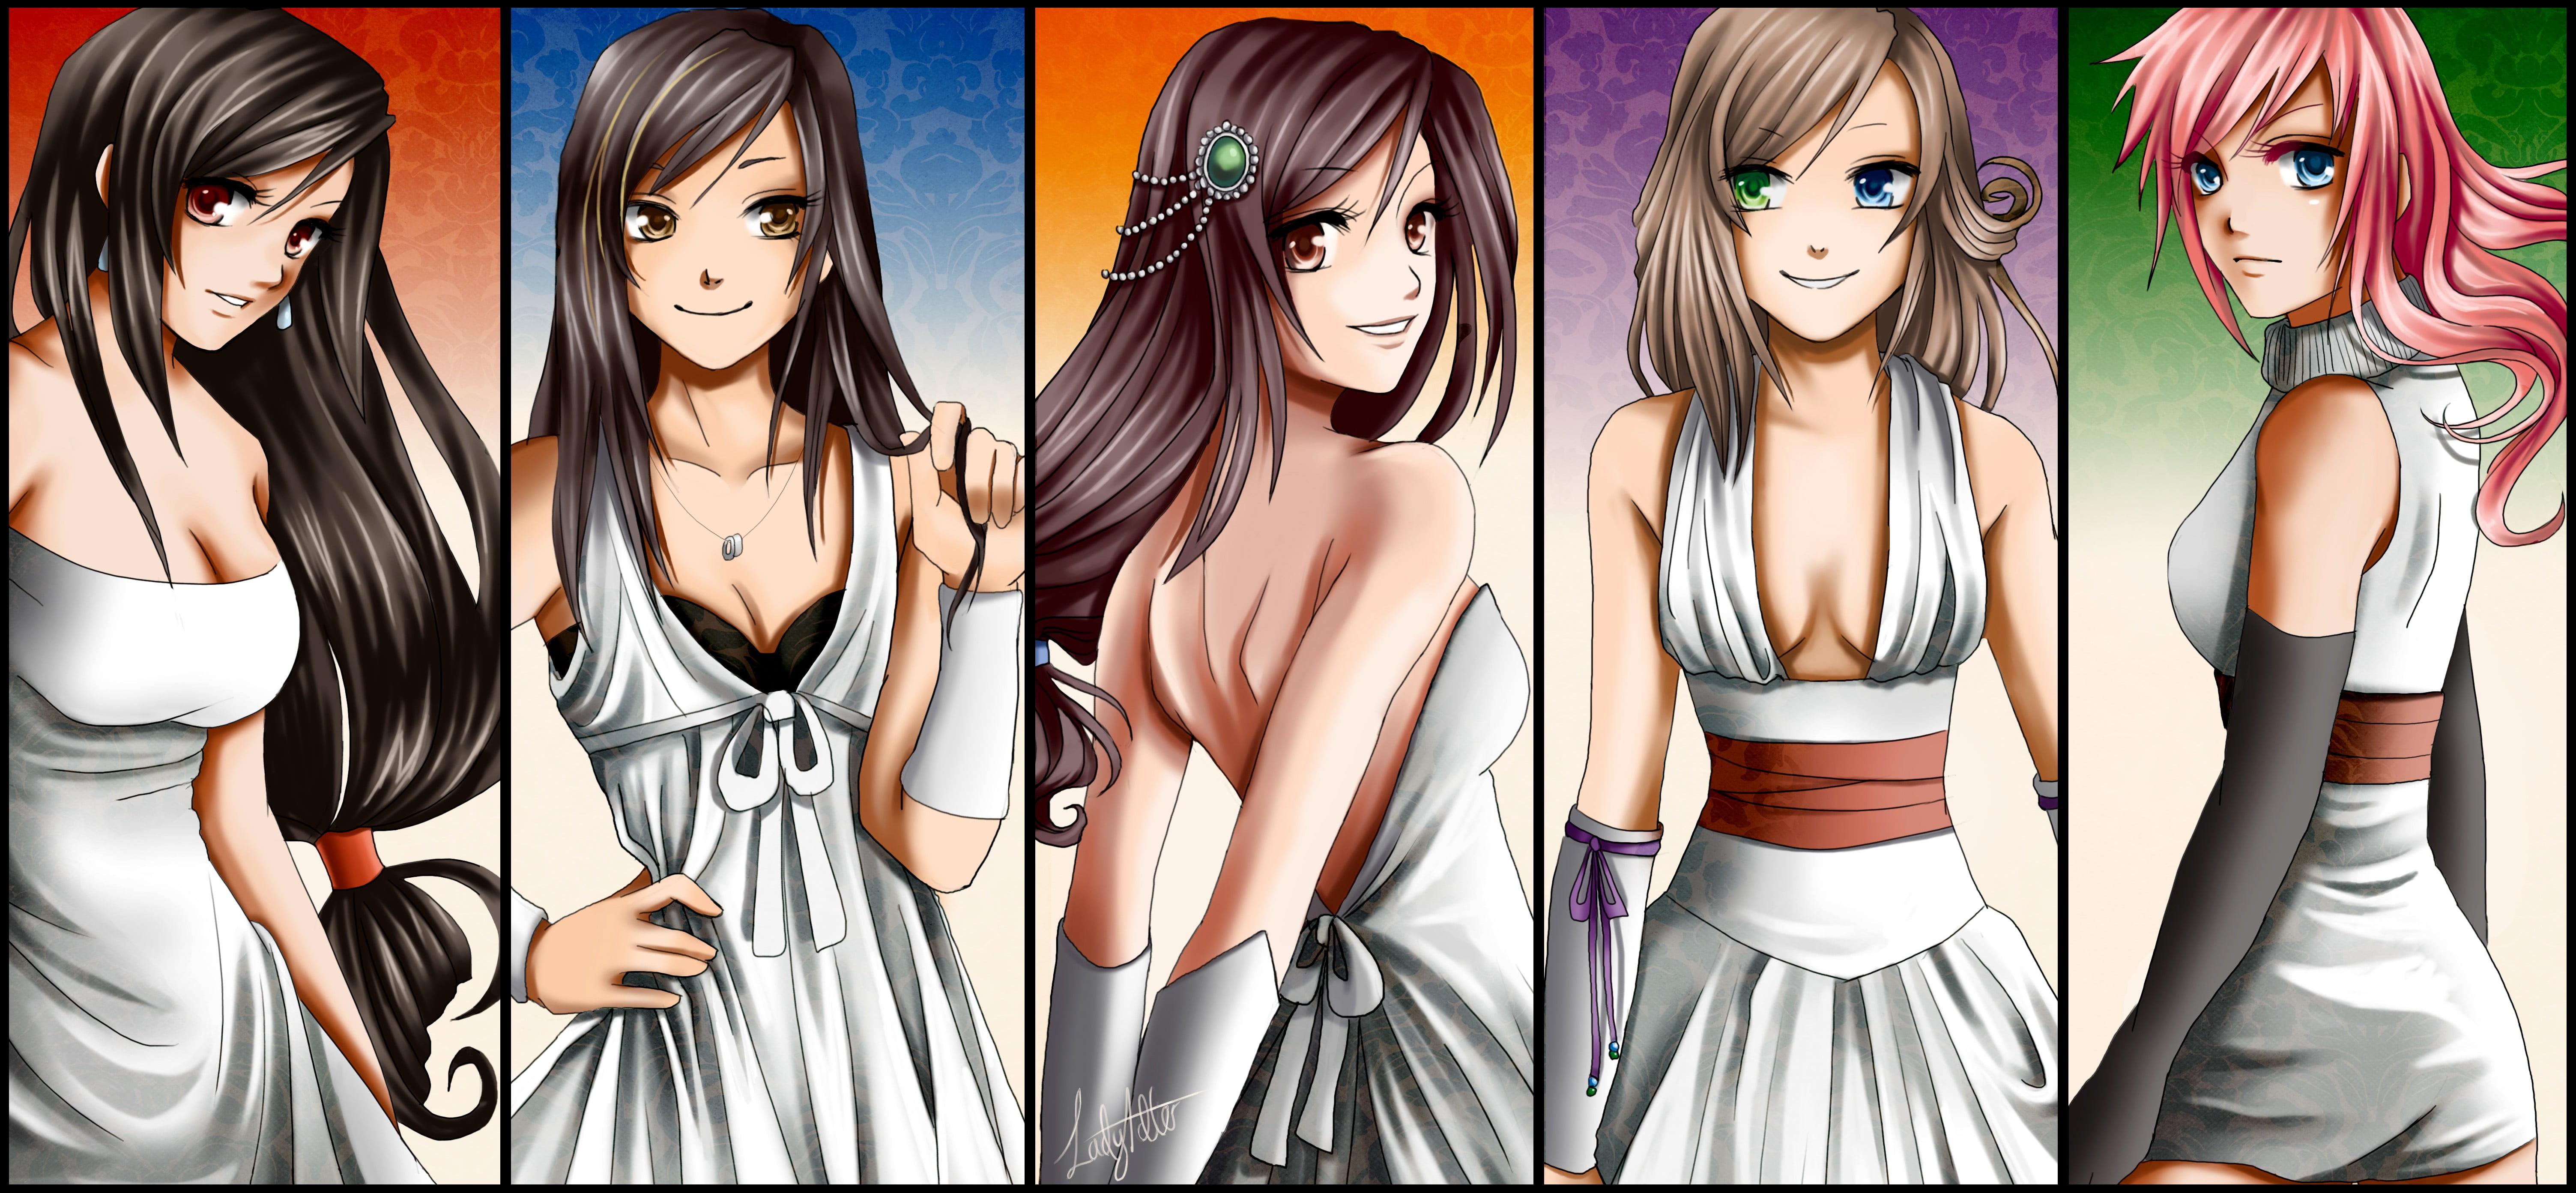 five female anime characters collage wallpaper, anime girls, Final Fantasy